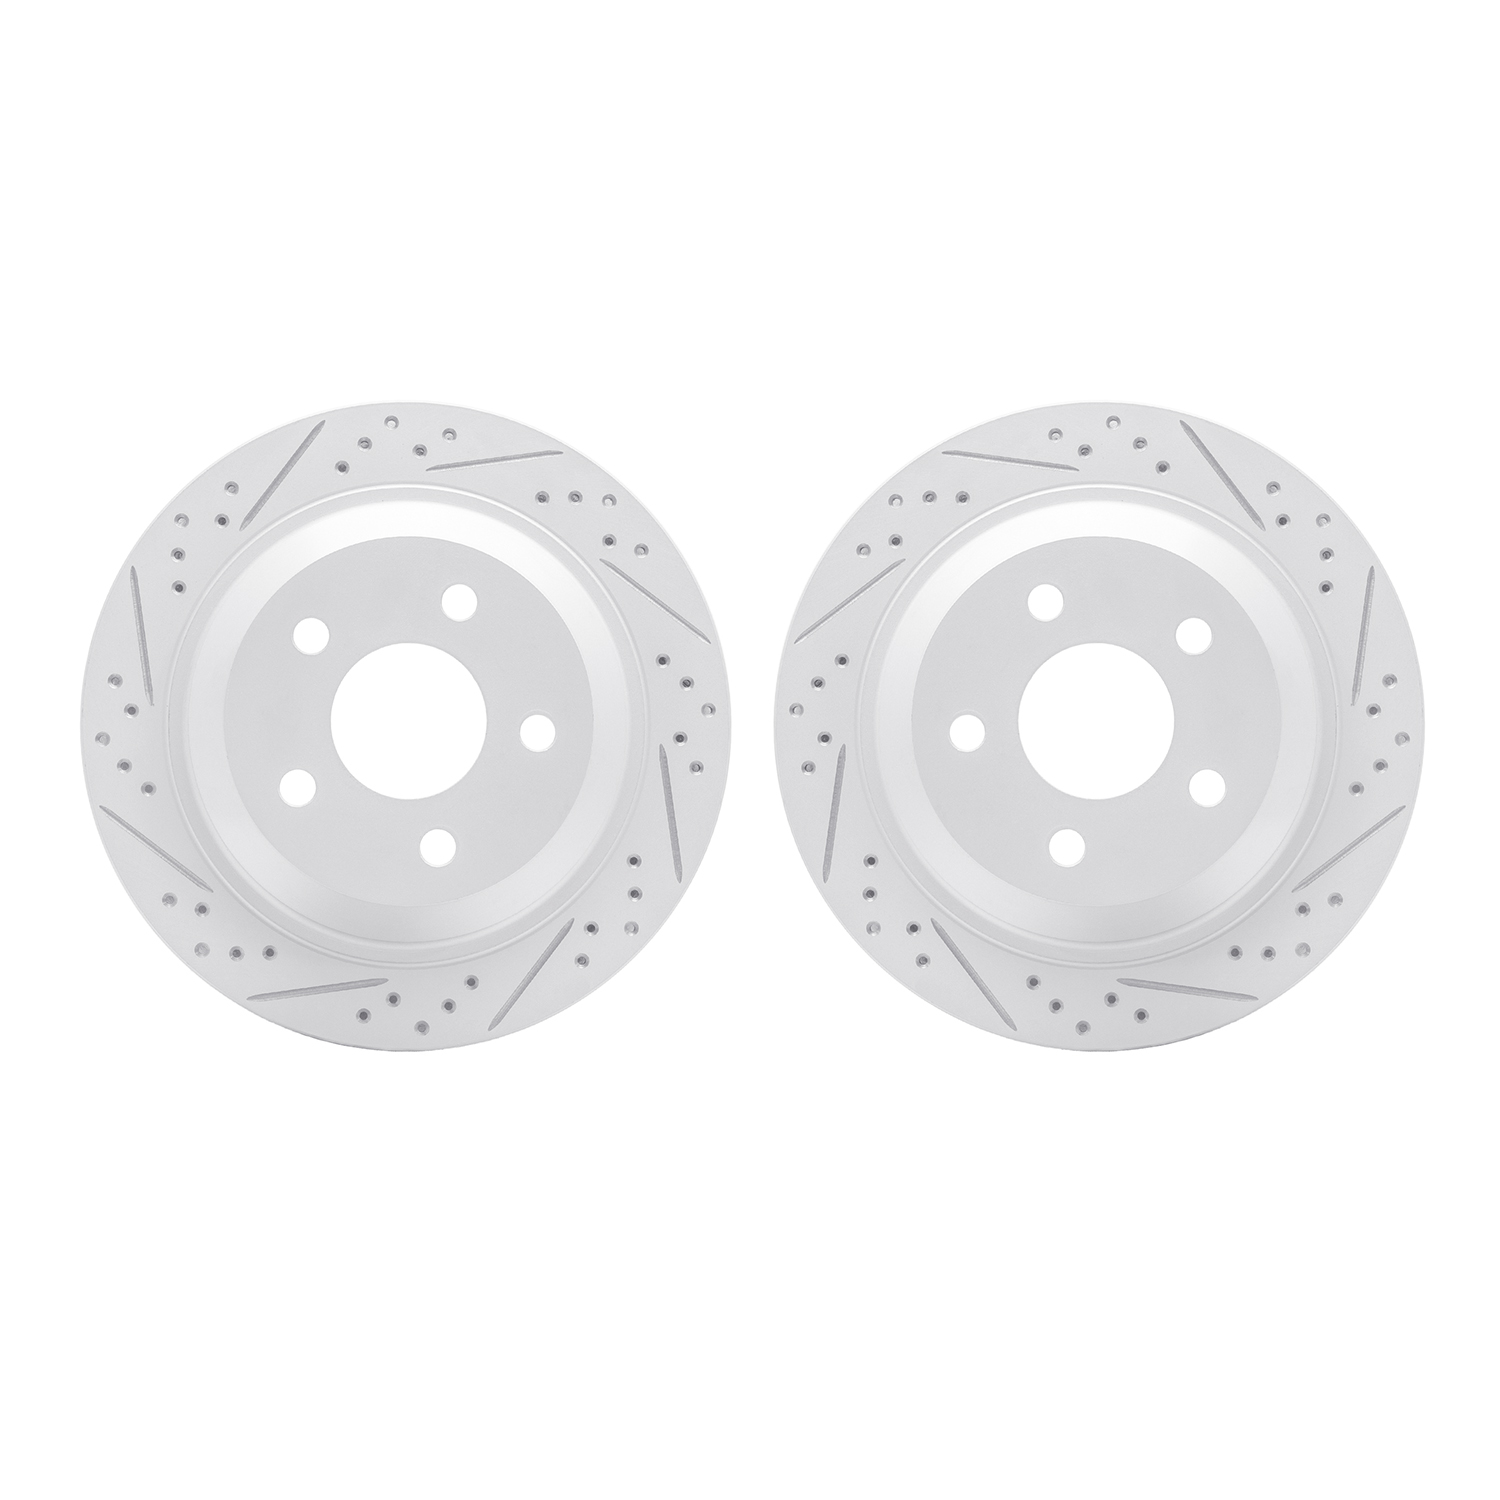 2002-52014 Geoperformance Drilled/Slotted Brake Rotors, 1998-2002 GM, Position: Rear